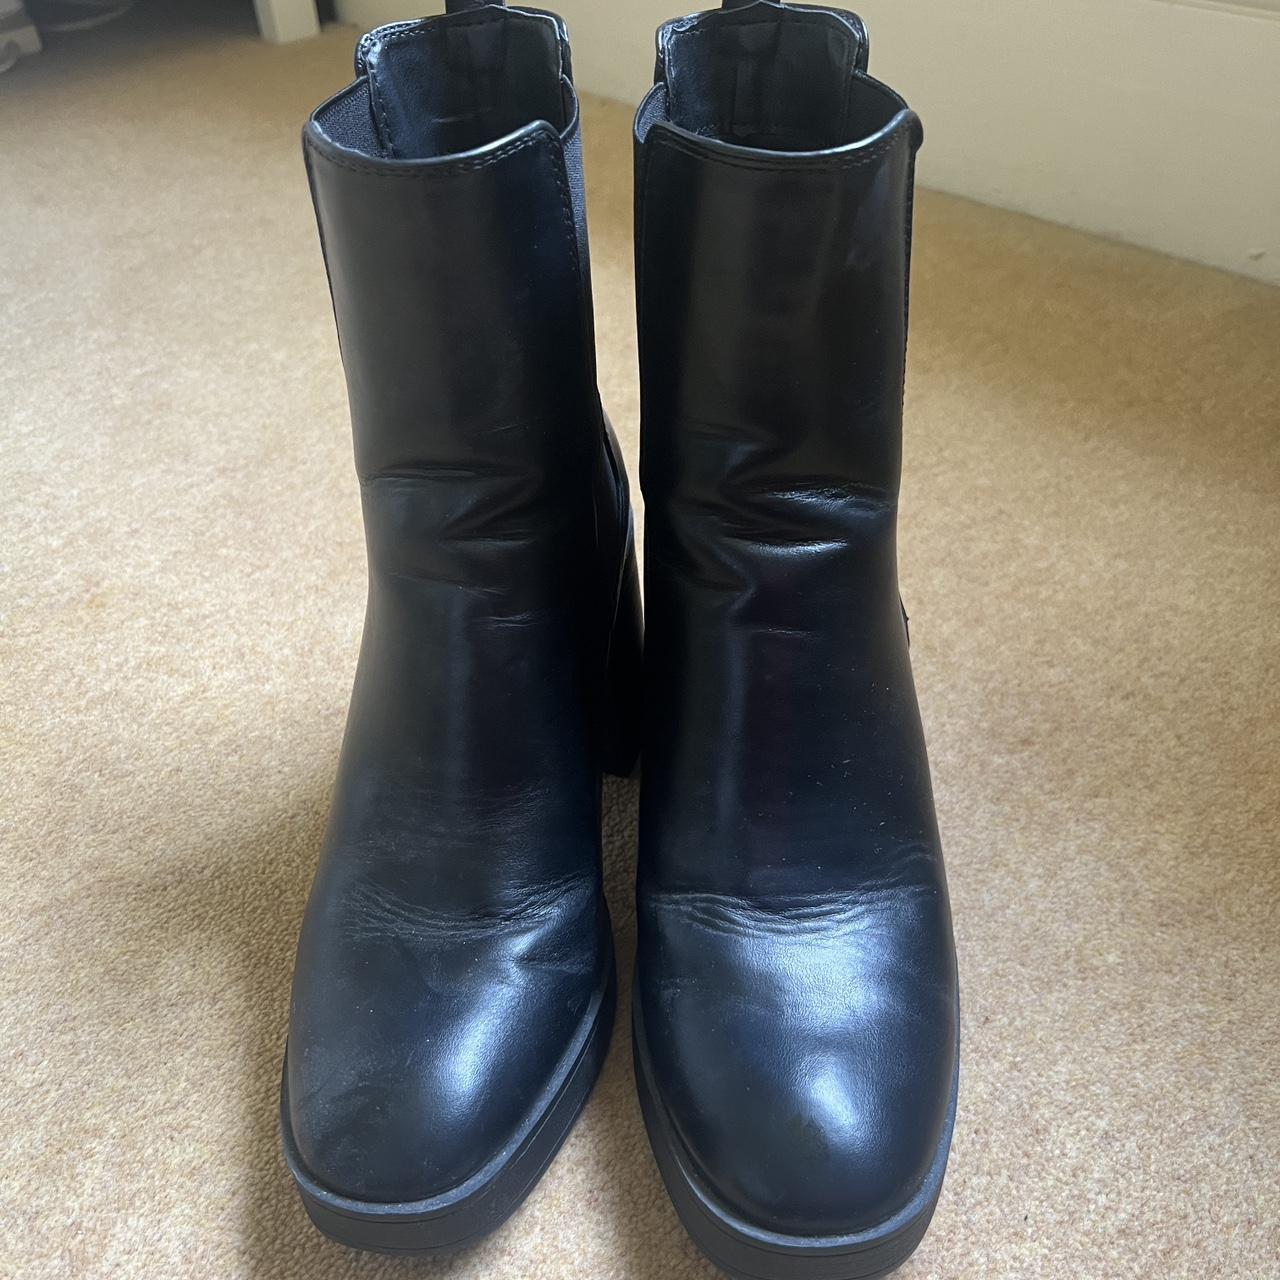 Black new look chunky heel boots Worn a couple of... - Depop